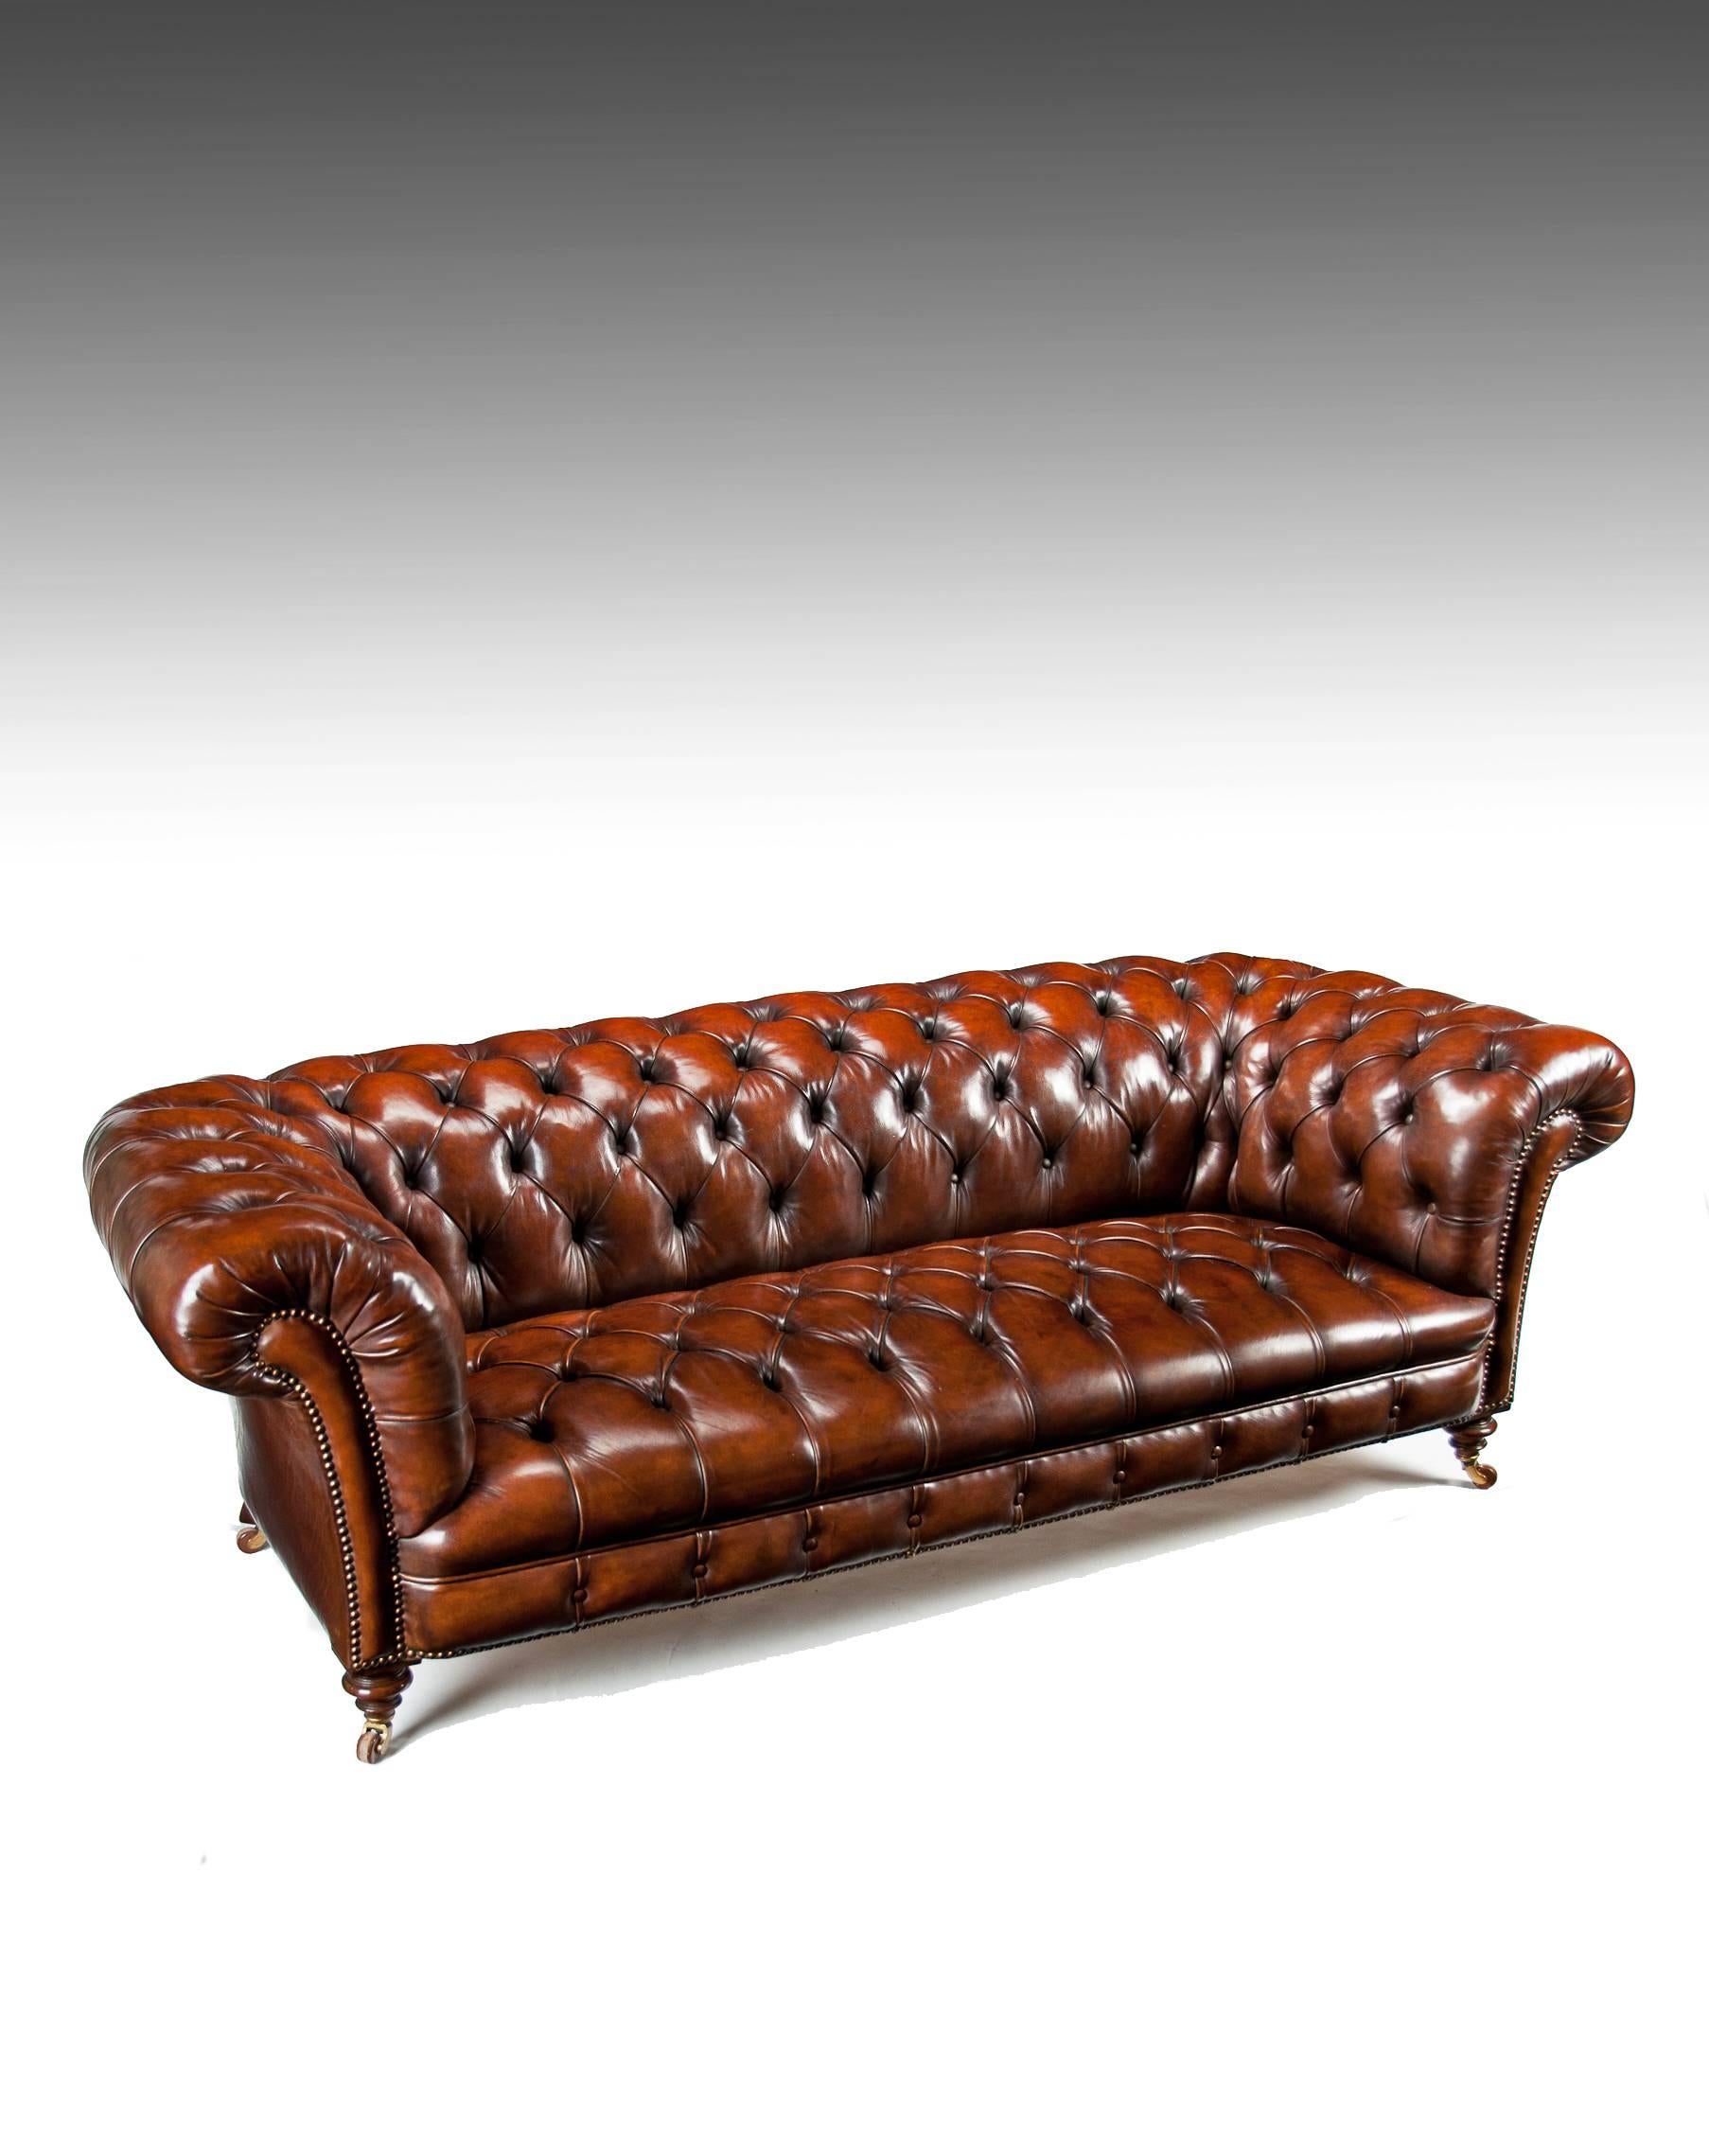 An extremely well-drawn 19th century Victorian walnut deep buttoned leather upholstered chesterfield stamped by the famous makers James Jas Shoolbred and Co London. Along with Howard and Sons Jas Shoolbred are two of the most sought after names in